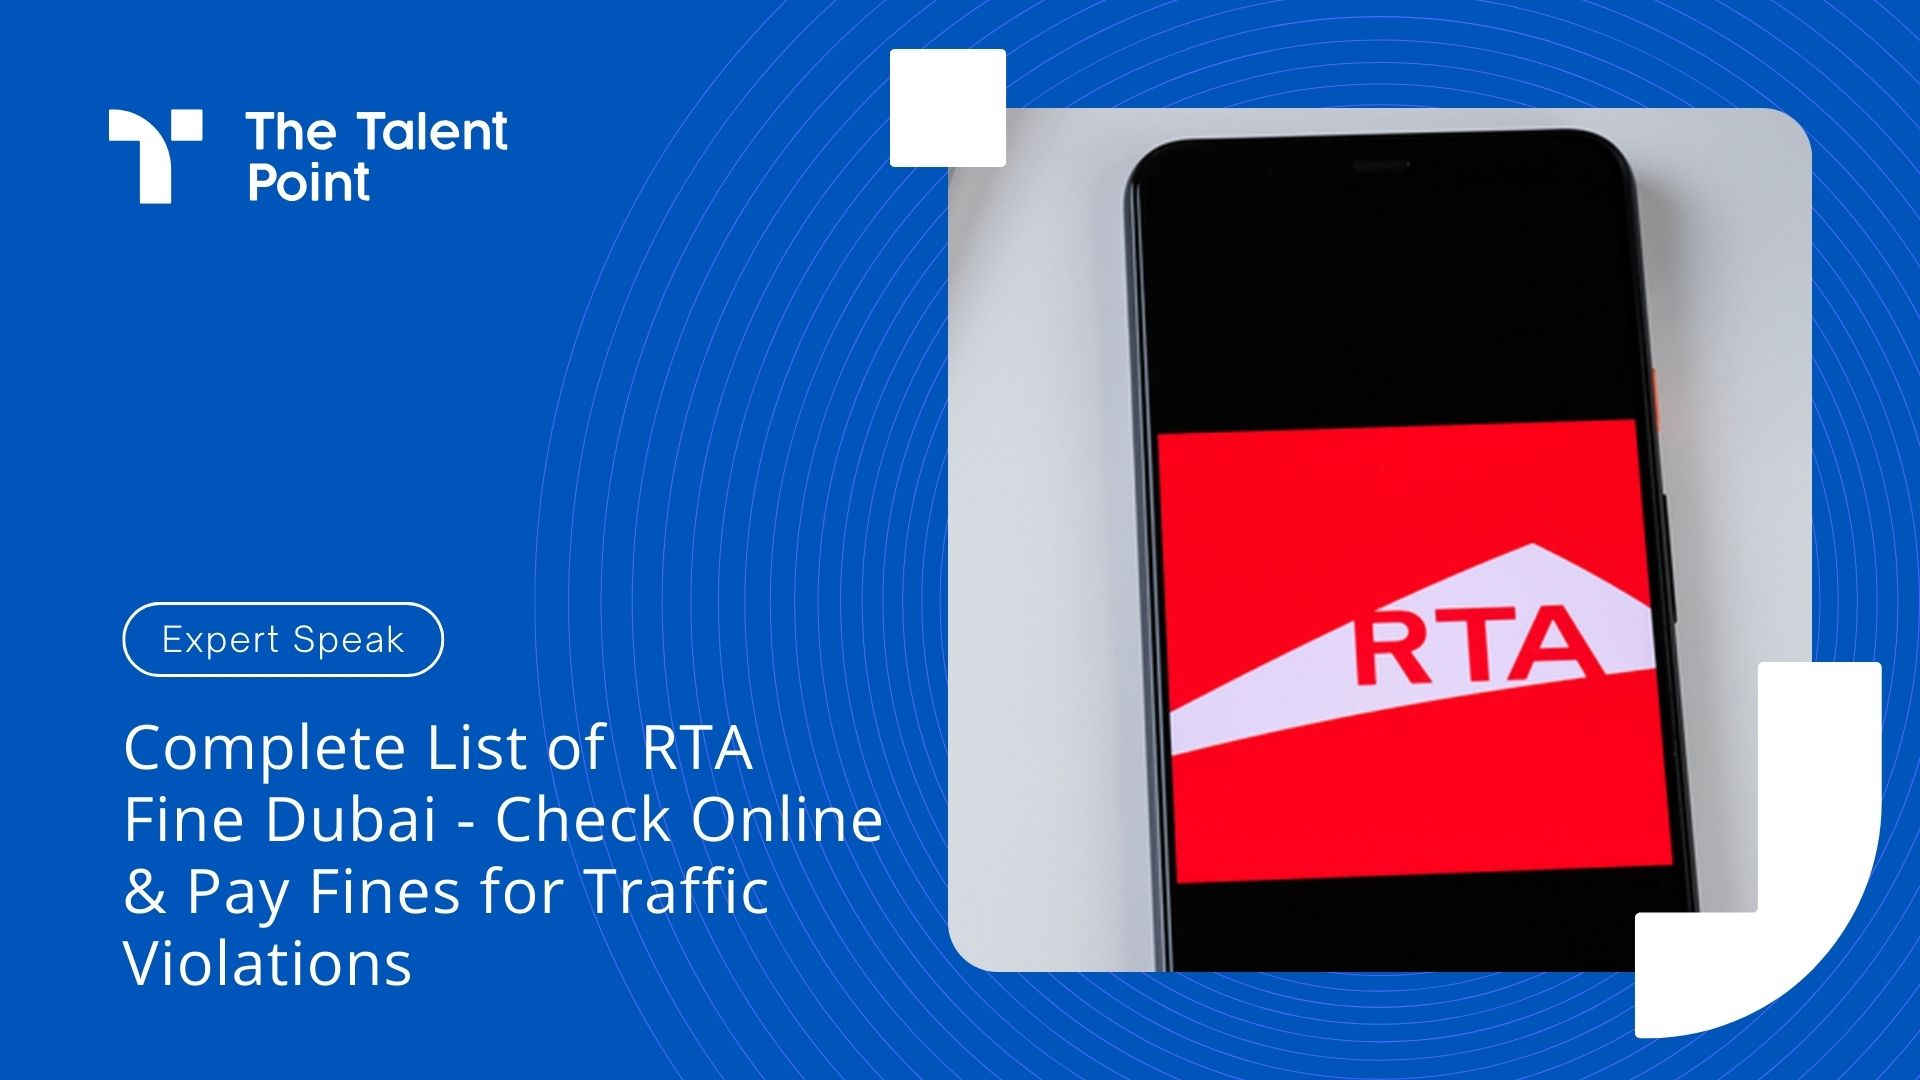 Complete List of RTA Fine Dubai - Check Online & Pay Fines for Traffic Violations